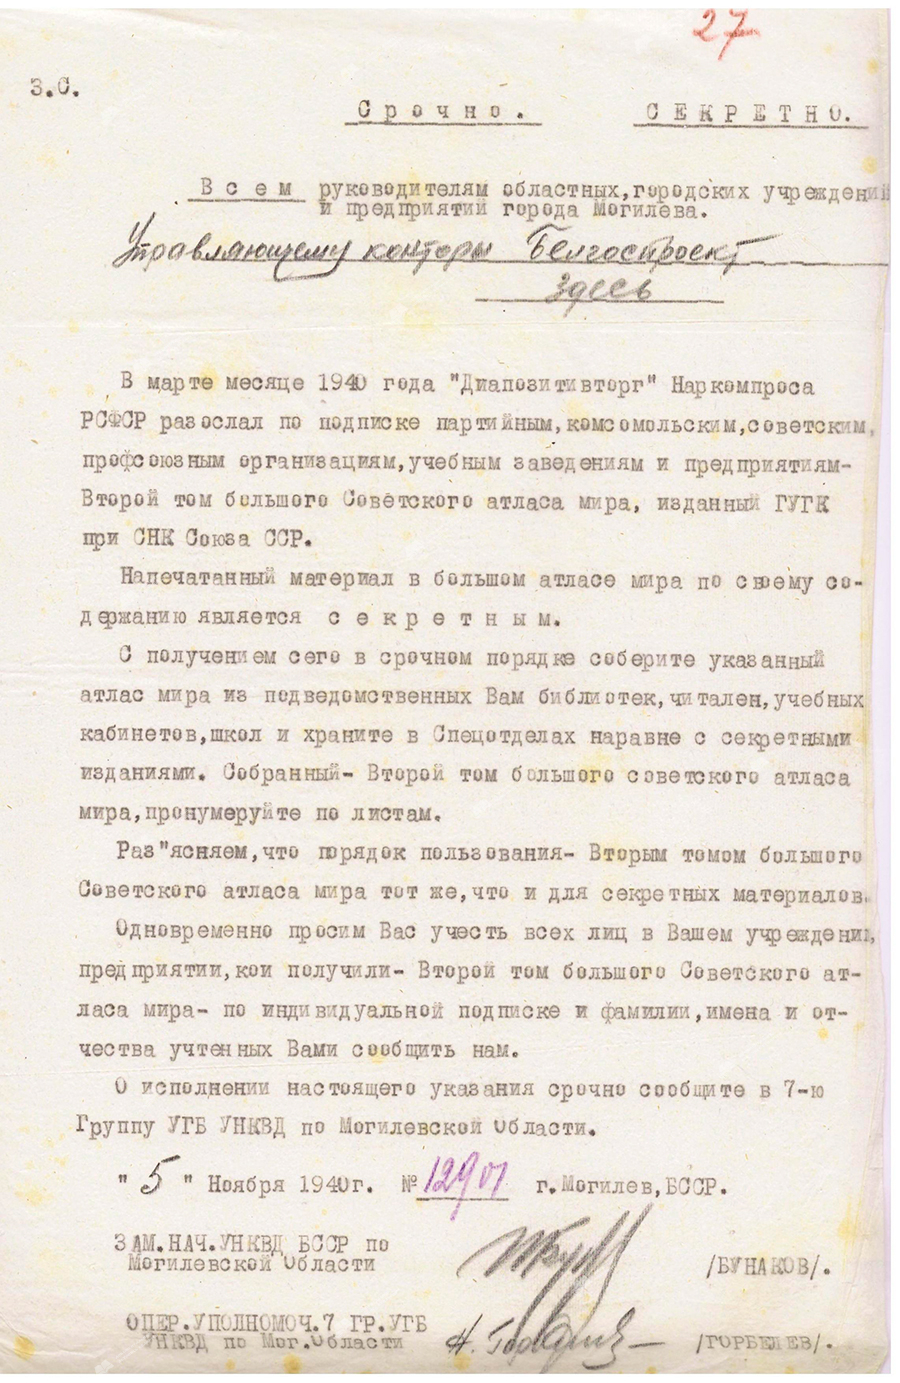 Letter from the Department of the People’s Commissariat of Internal Affairs for the Mogilev Region to the heads of regional, city institutions and enterprises of the city of Mogilev on the procedure for storing and using the second volume of the Great Soviet Atlas of the World in institutions and organizations of the city of Mogilev-с. 0